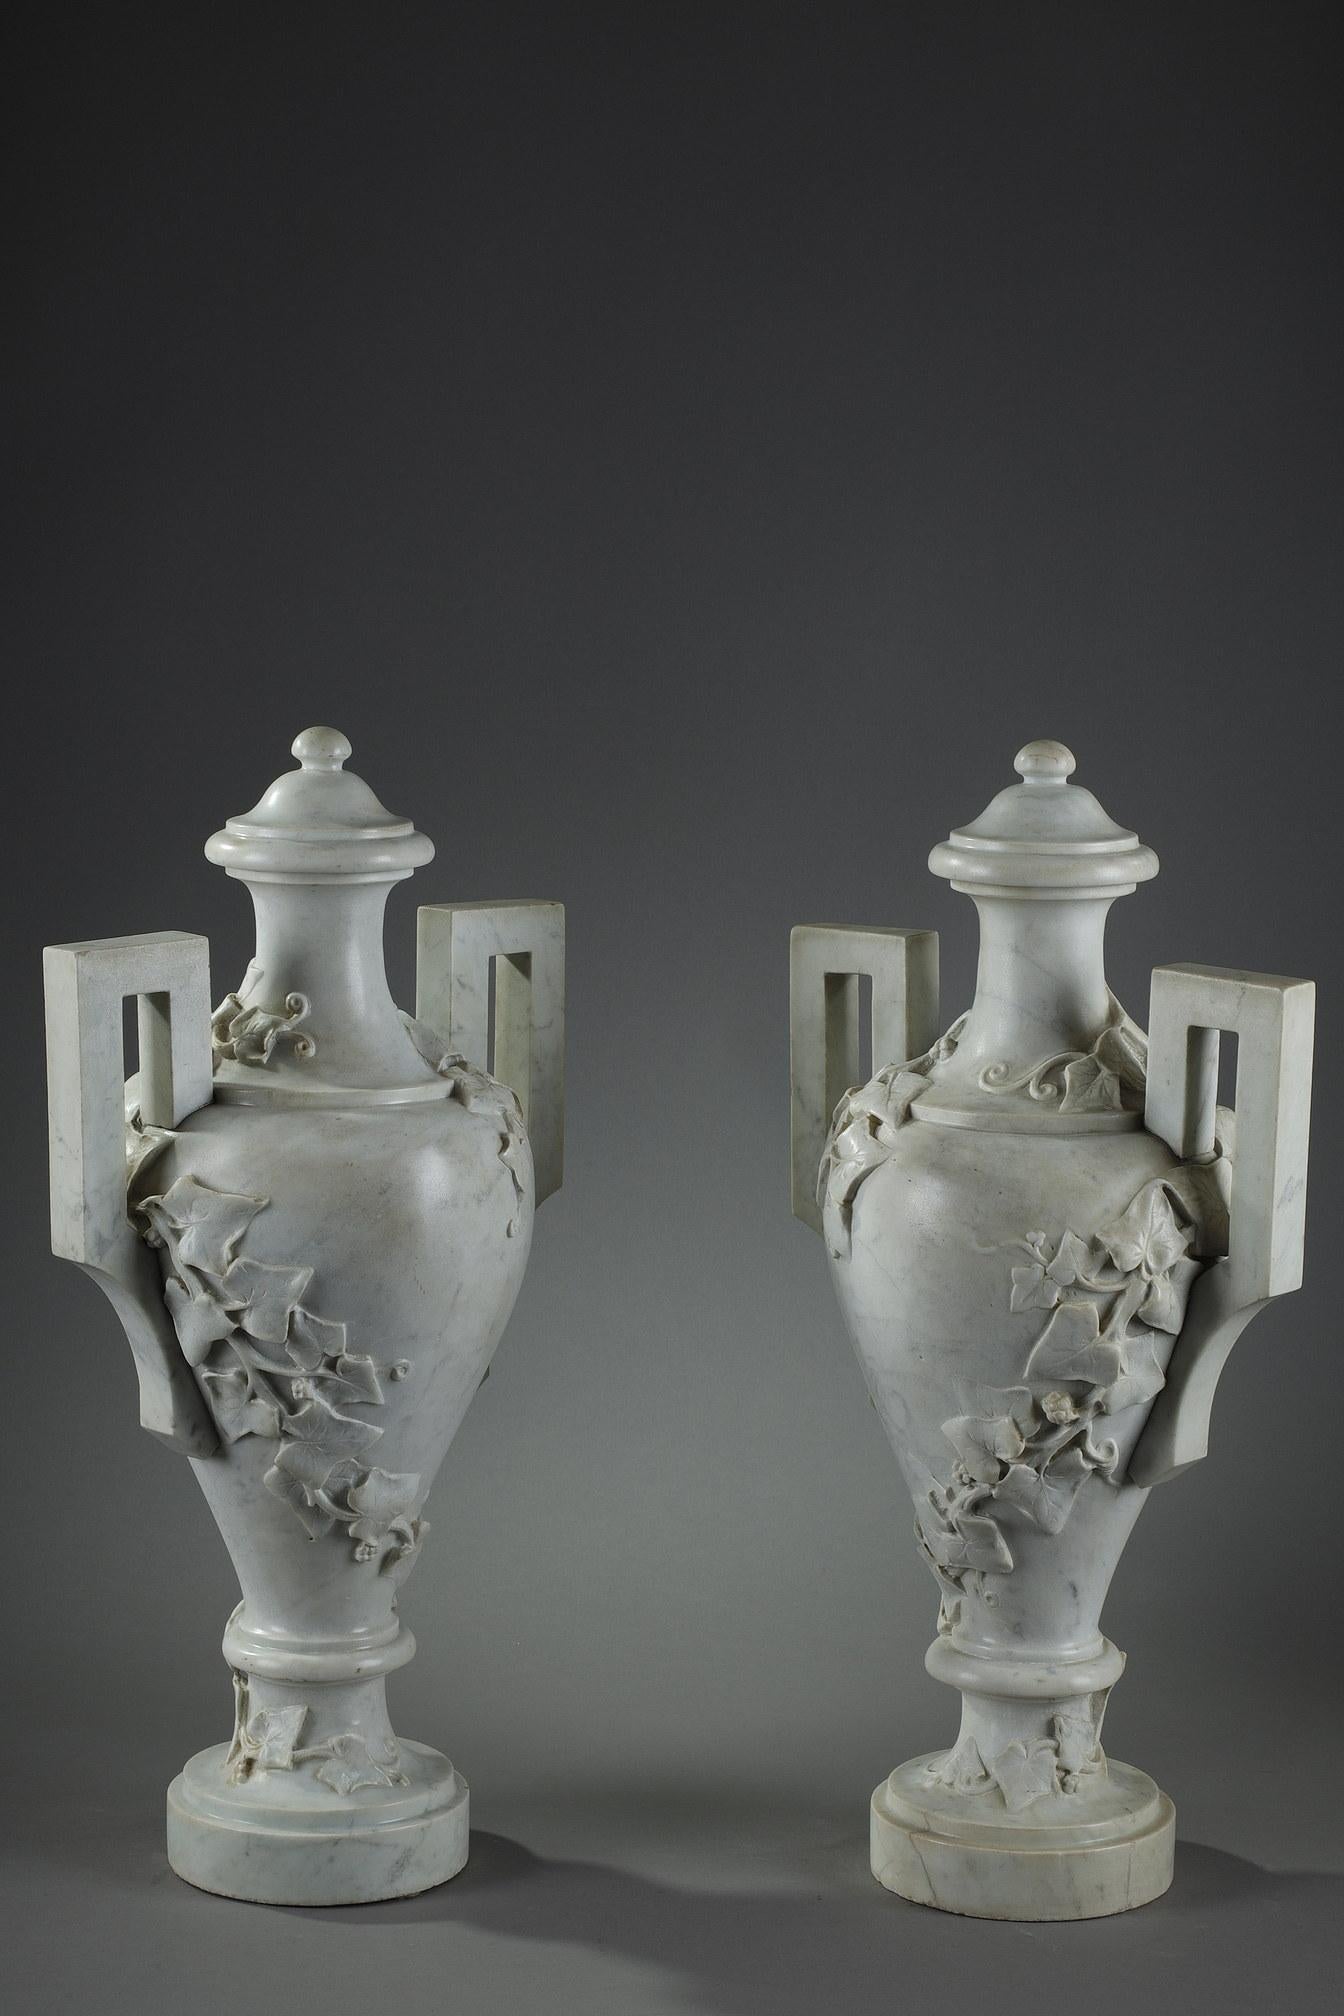 Greek Revival Pair of White Marble Vases with Ivy Decoration, 19th Century For Sale